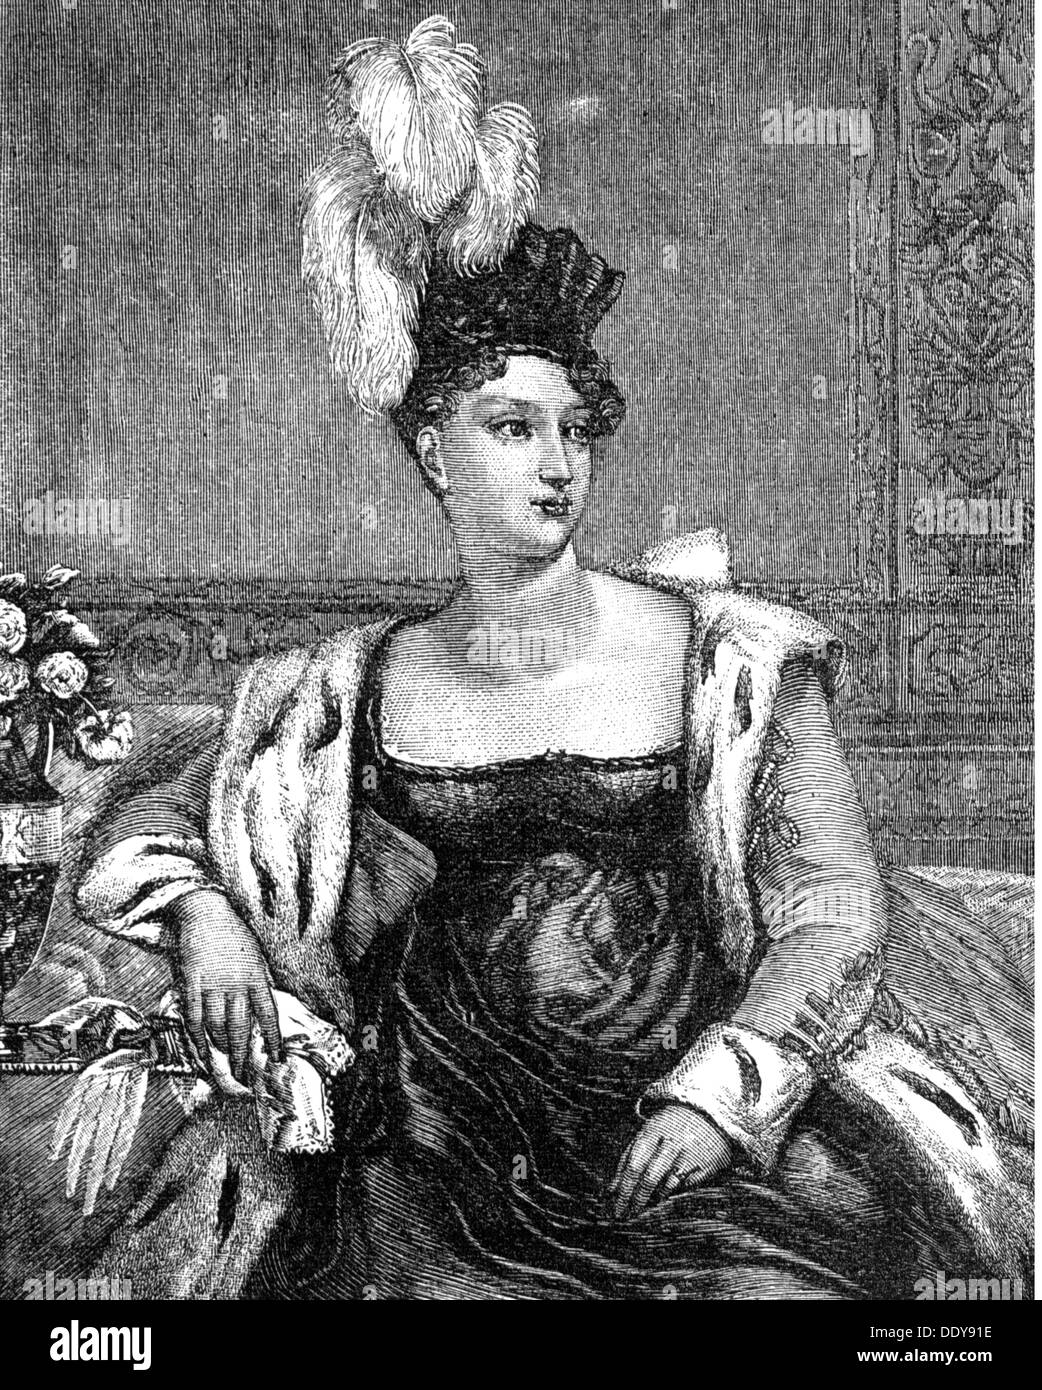 Charlotte Augusta, 7.1.1796 - 5.11.1817, Princess of Wales, half length, wood engraving after painting by Chalon, 19th century, Stock Photo